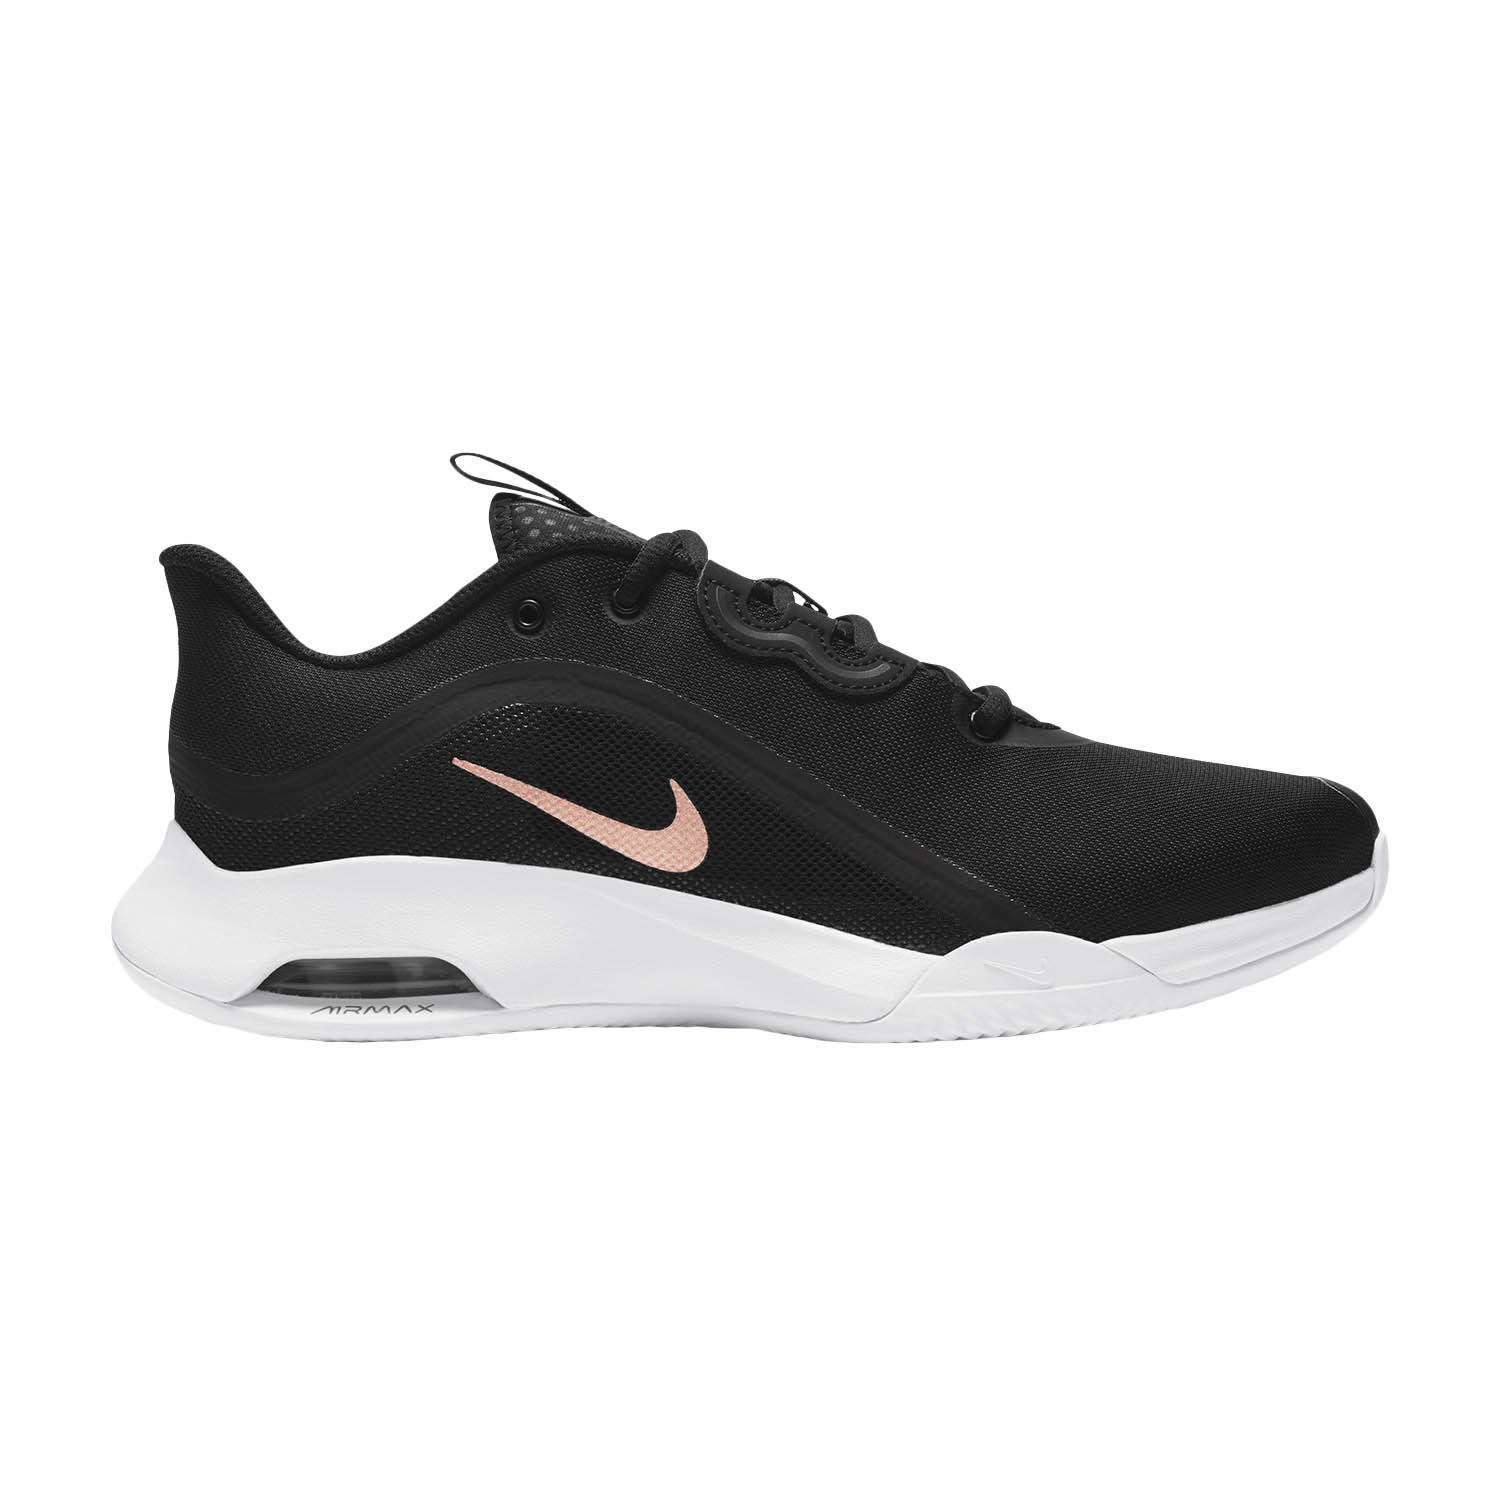 Nike Air Max Volley Clay - Black/Metallic Red Bronze/White